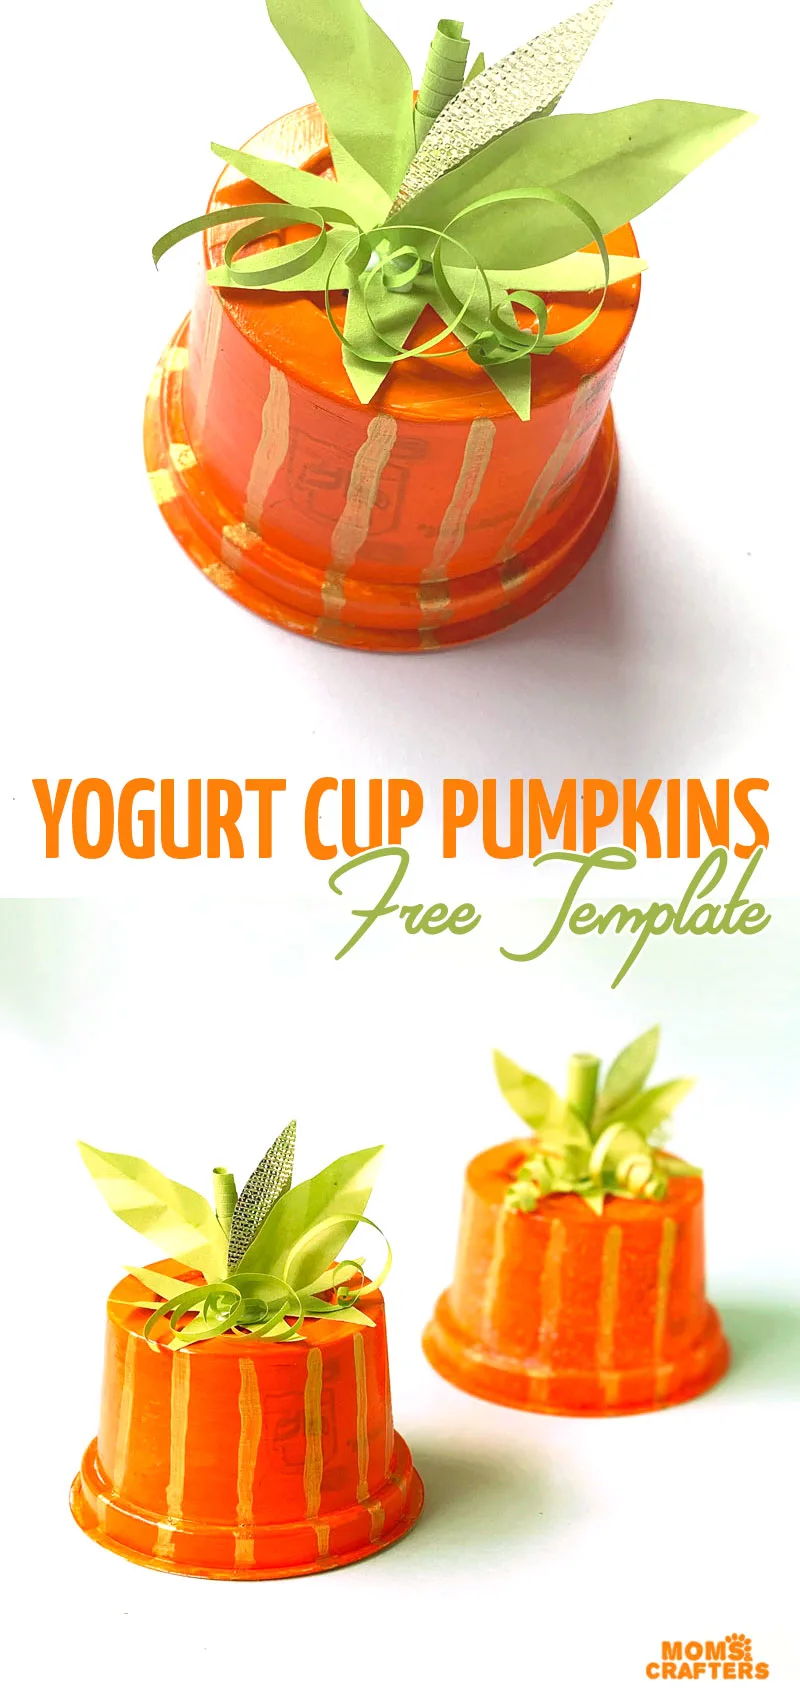 Make your own recycled pumpkins using yogurt or applesauce cups! This fun pumpkin craft for kids - for toddlers, preschoolers, and big kids too - is super easy and uses stuff you already have. And the cool topper comes with a free printable template.